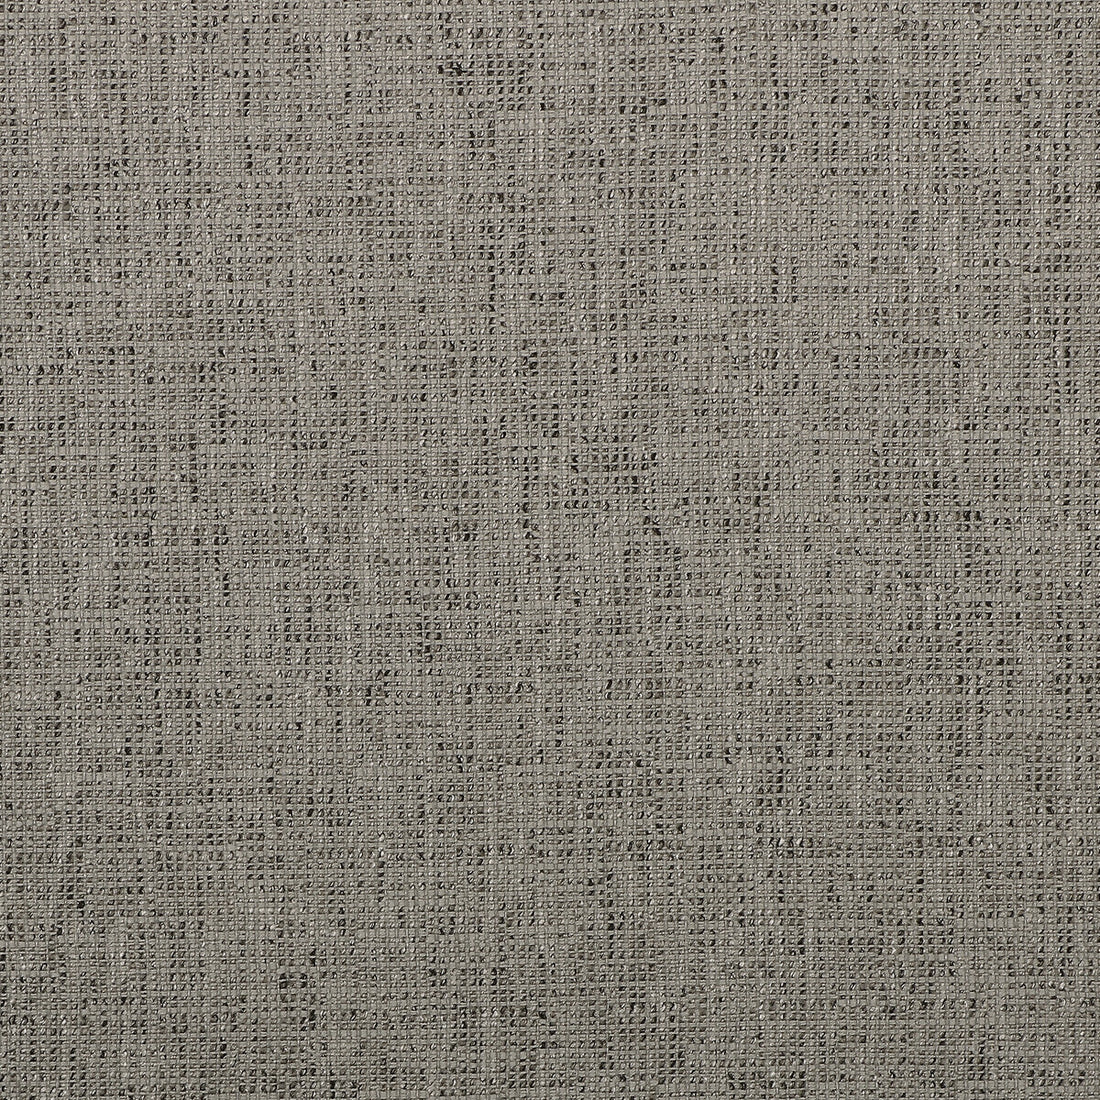 Kravet Smart fabric in 35518-21 color - pattern 35518.21.0 - by Kravet Smart in the Inside Out Performance Fabrics collection